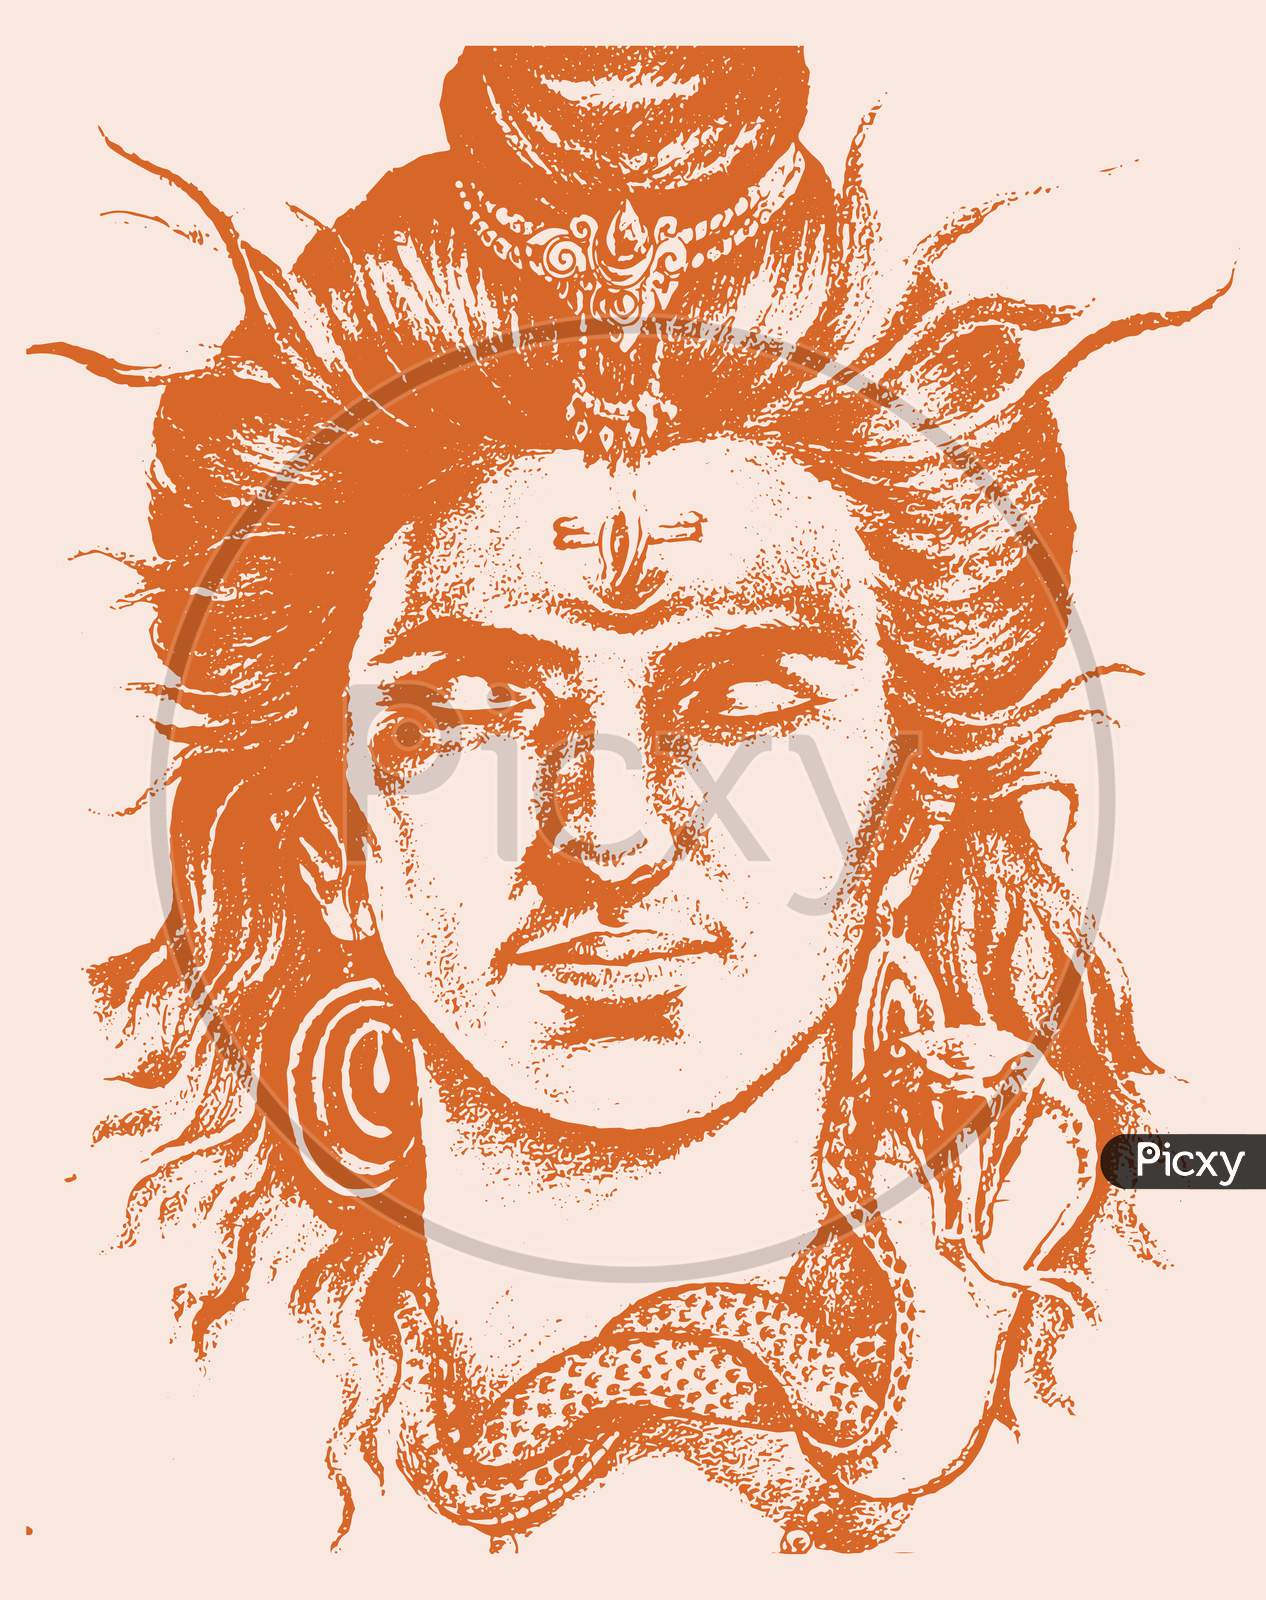 Lord Shiva Images :: Photos, videos, logos, illustrations and branding ::  Behance